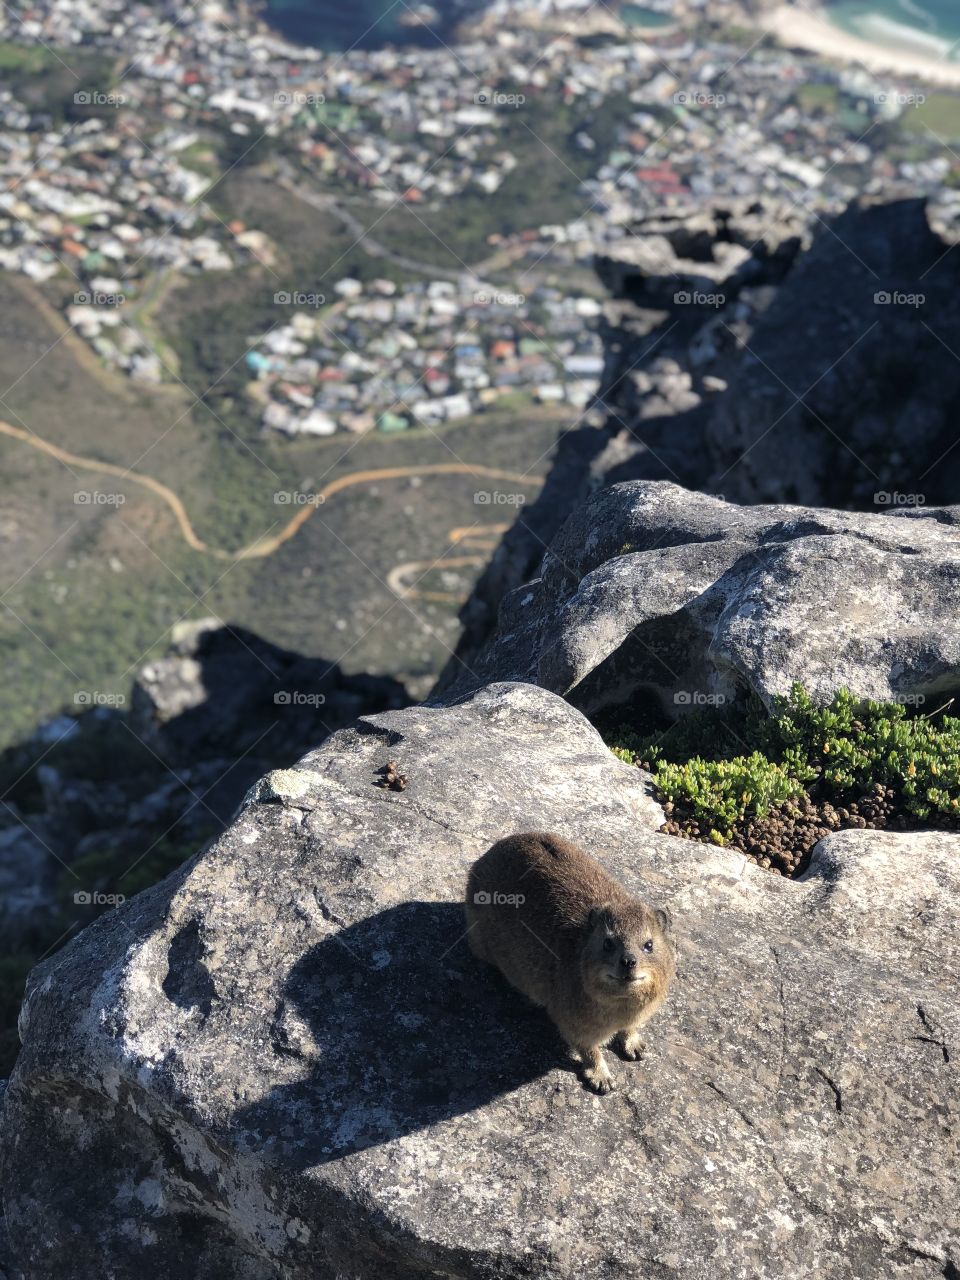 Animals in Cape Town